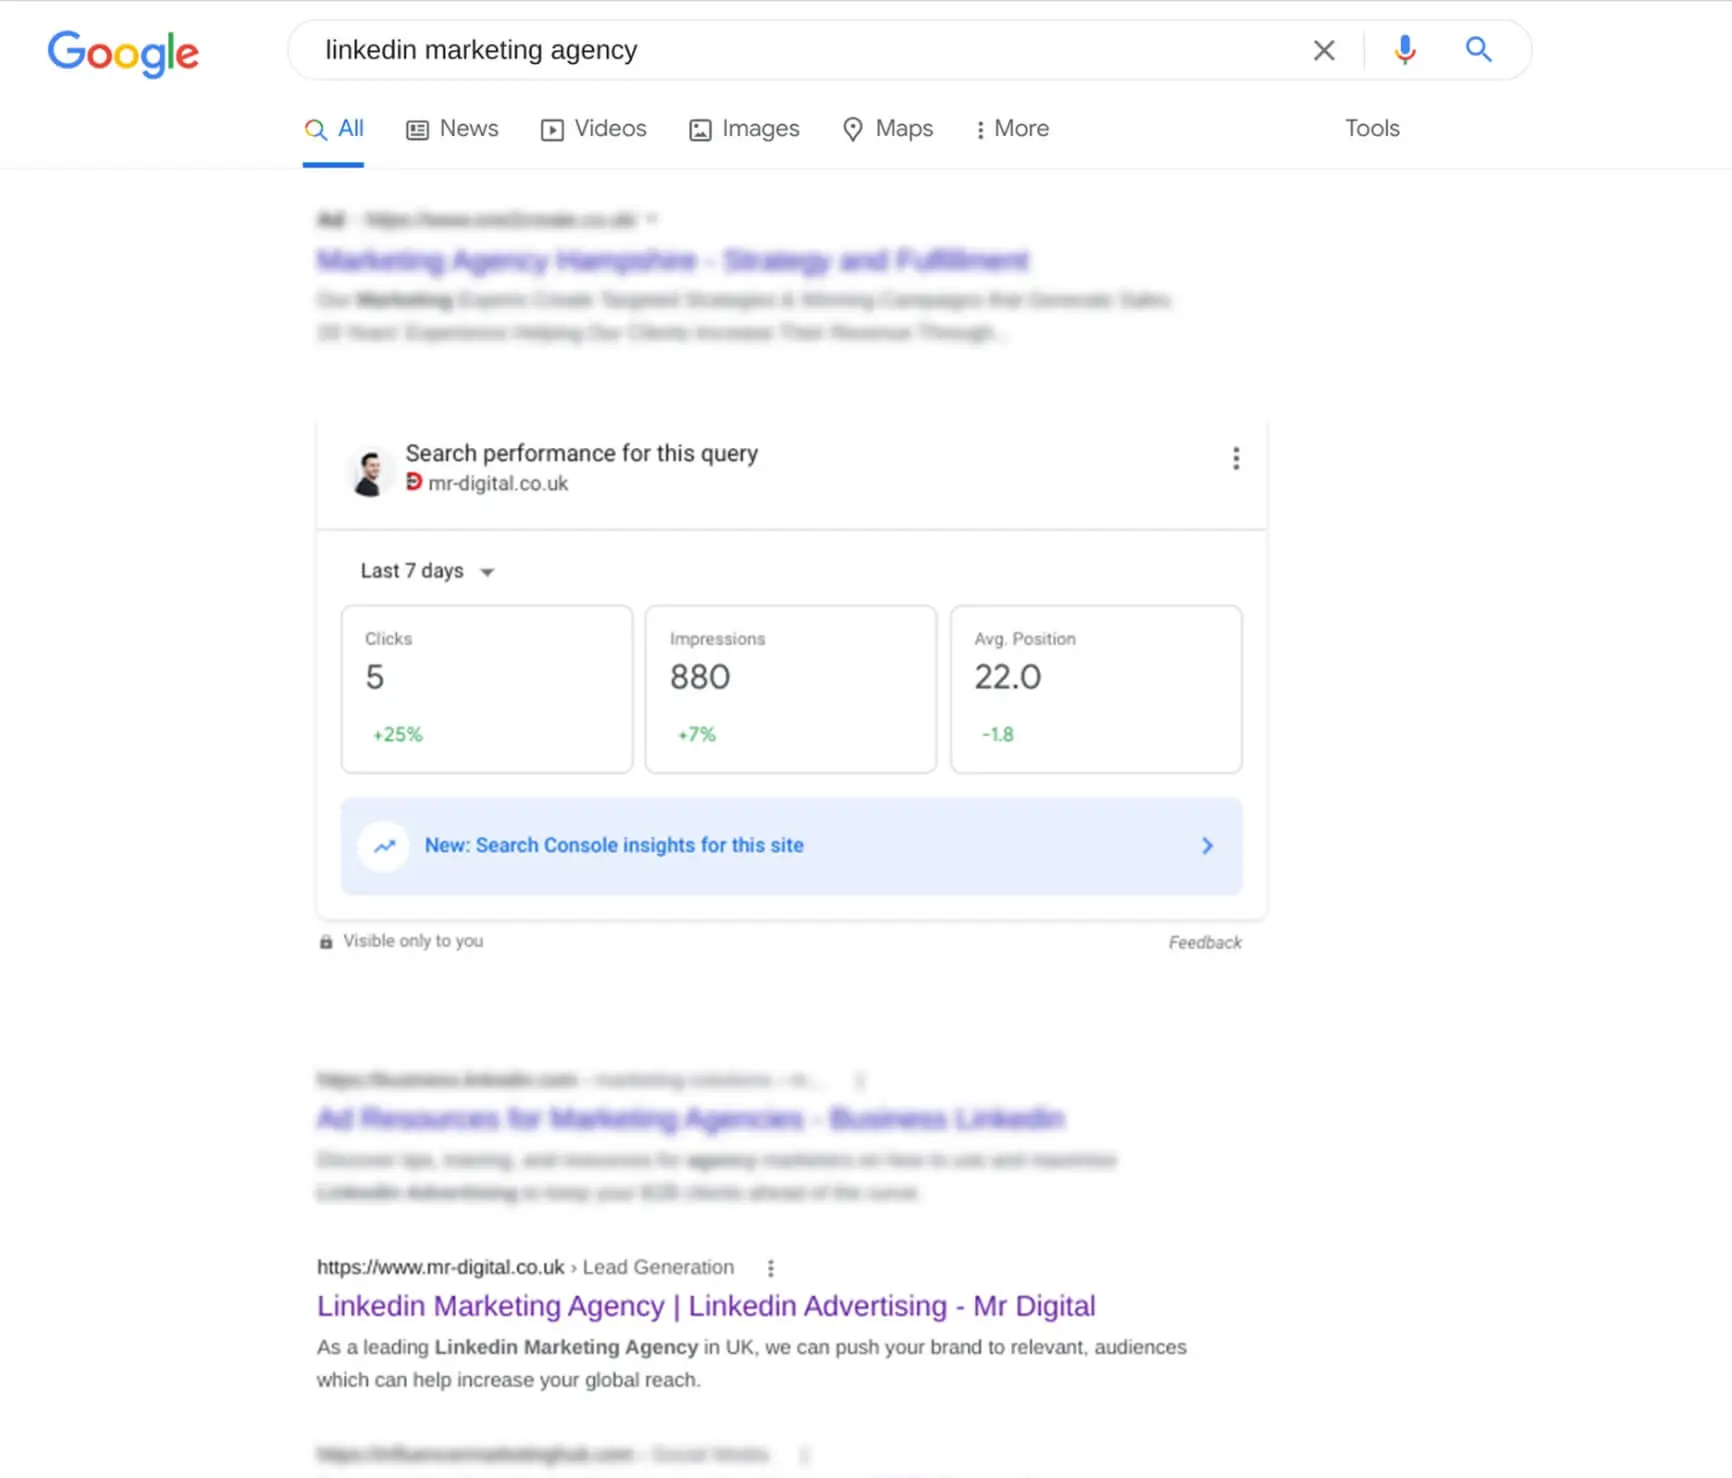 Results from SEO Checklist actions